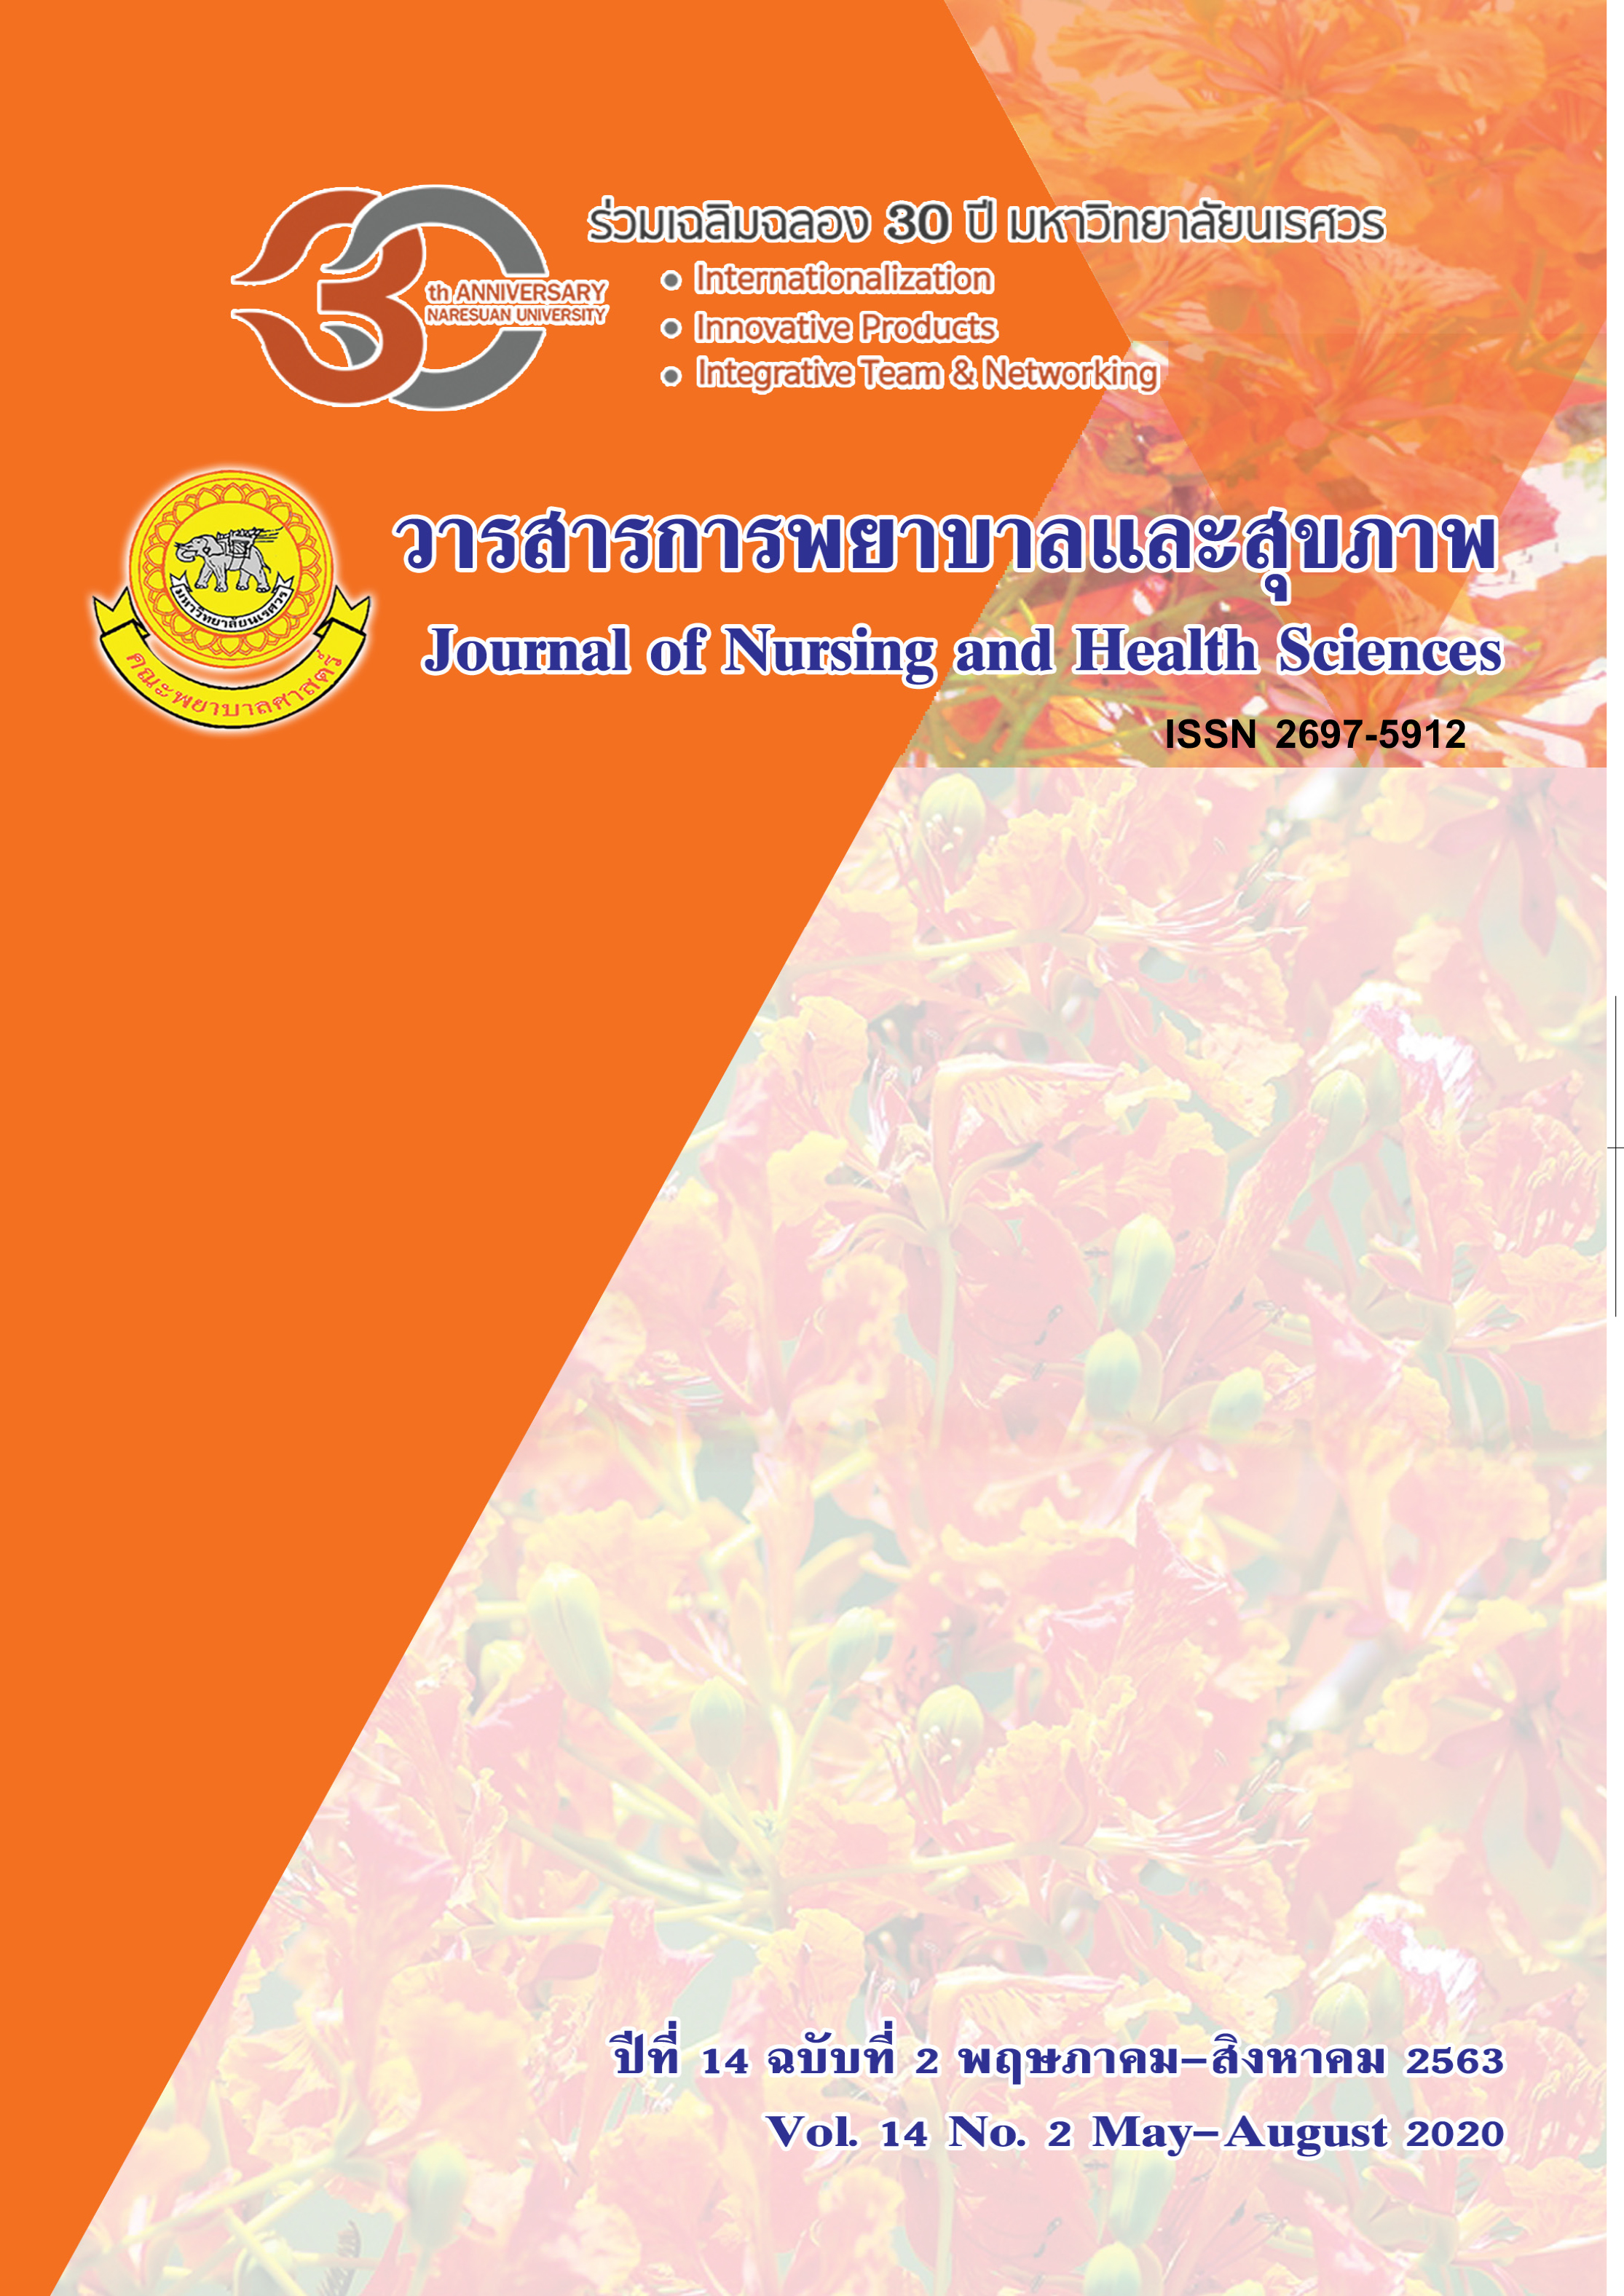 					View Vol. 14 No. 2 (2020): Journal of Nursing and Health Sciences
				